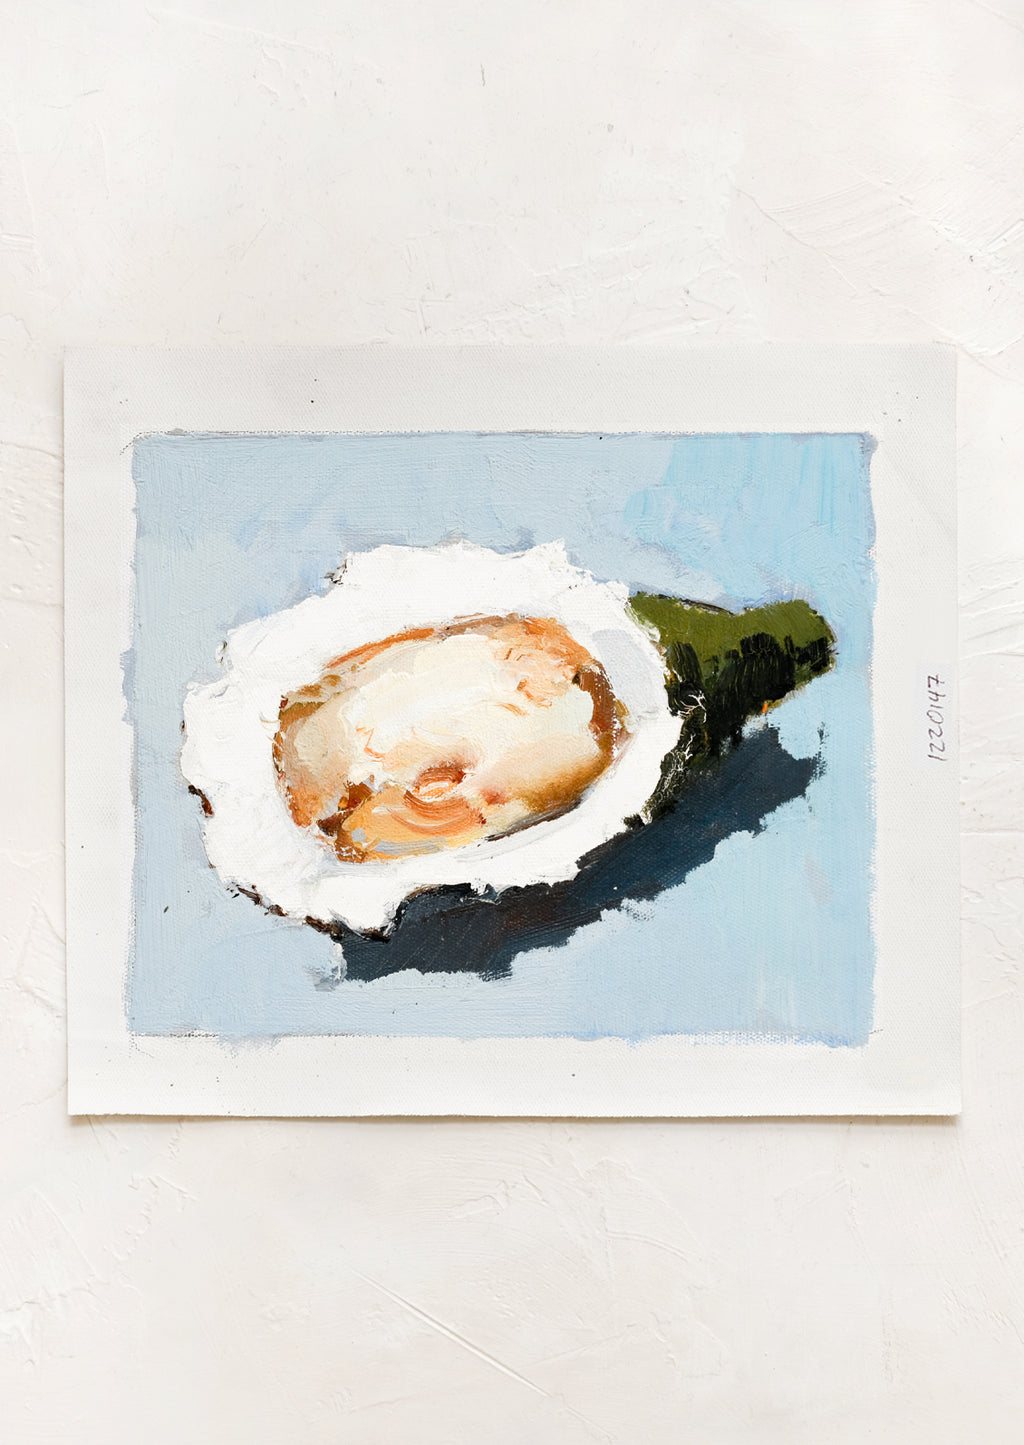 1: An original oil painting on unstretched canvas of oyster still life on blue background.